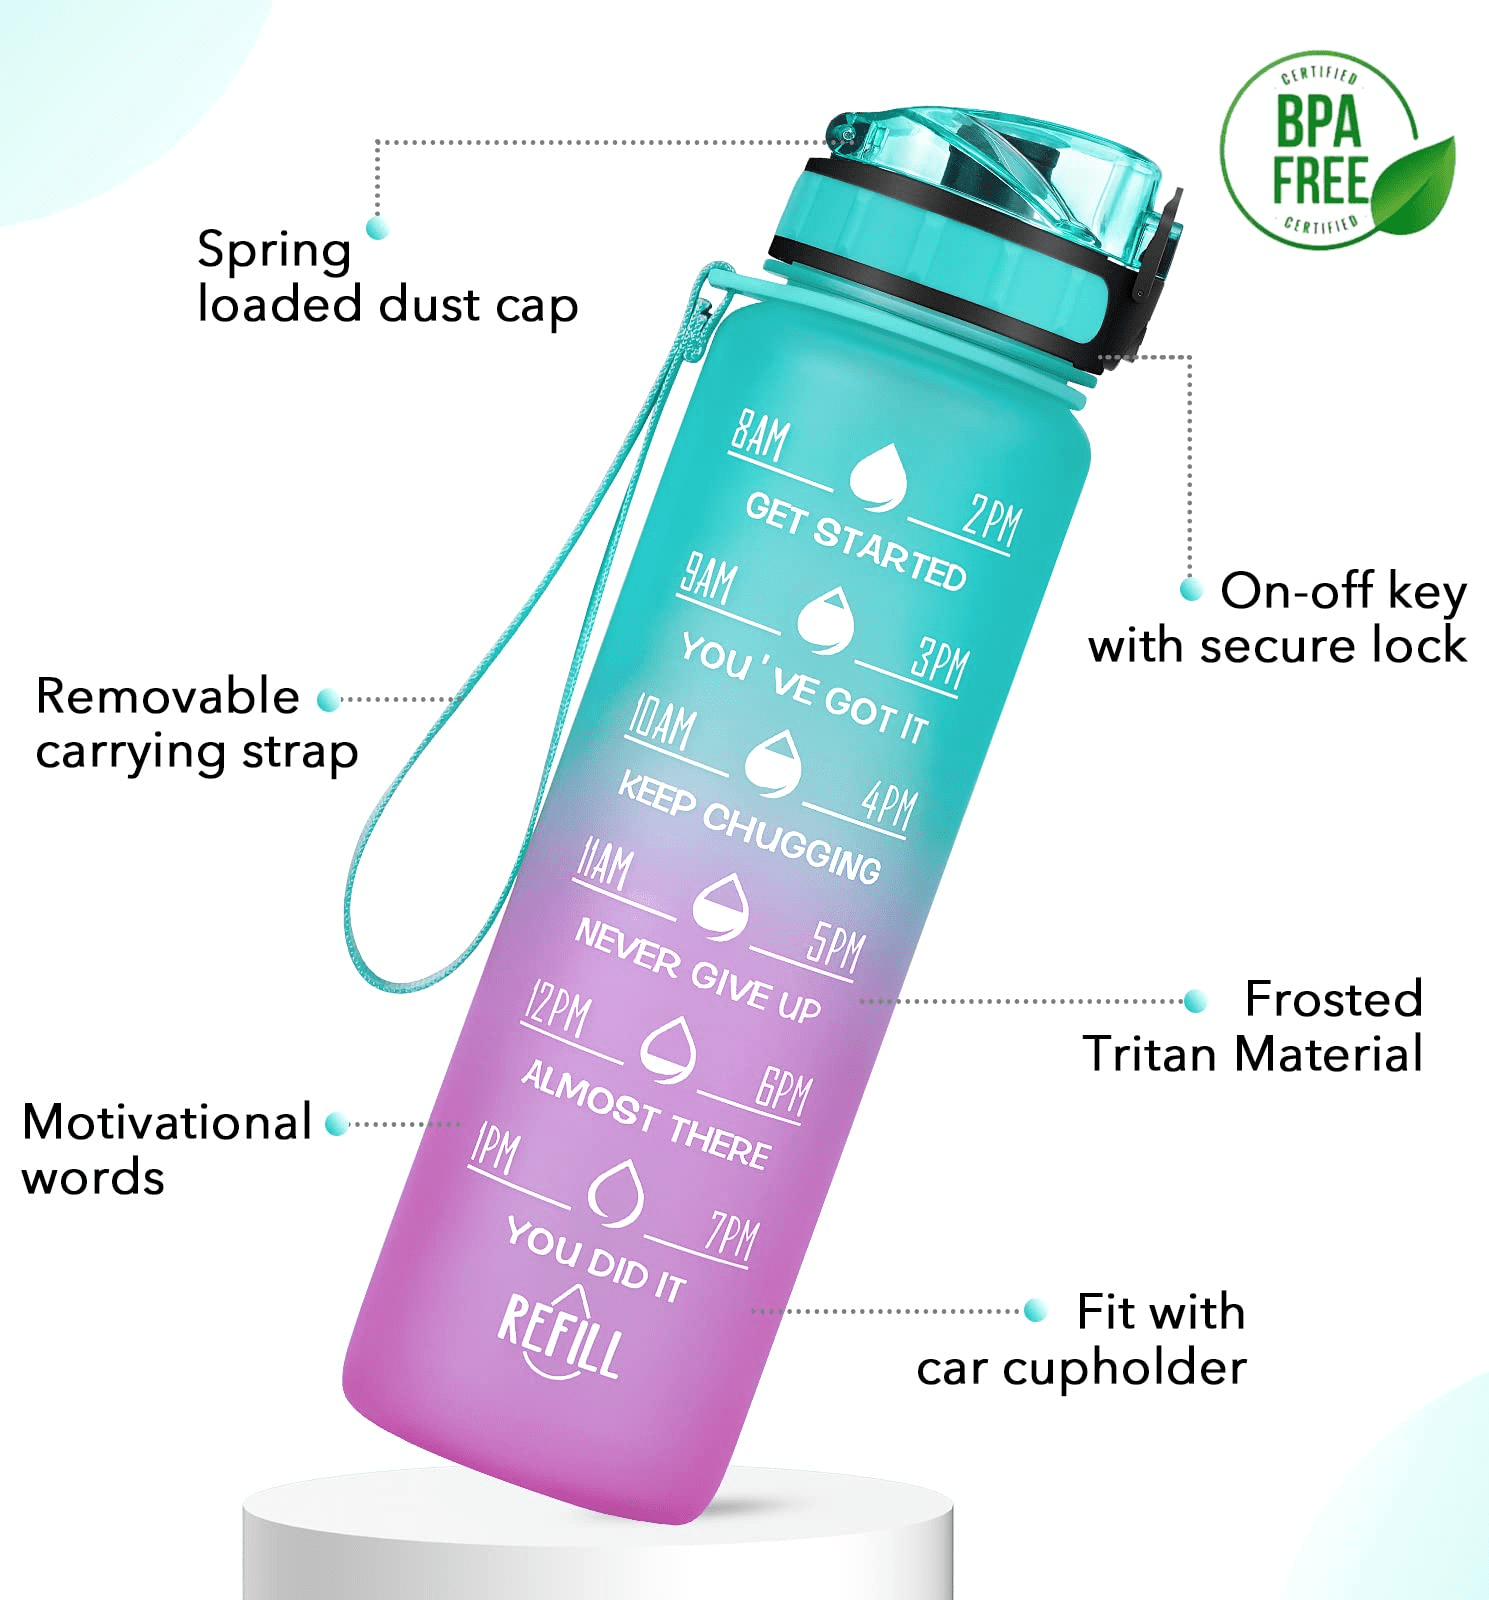 Mayim Motivational Water Bottle with Flip Straw Lid and Chug Lid, Time-Marker Sports Water Bottle, 32 Ounces, Fuchsia